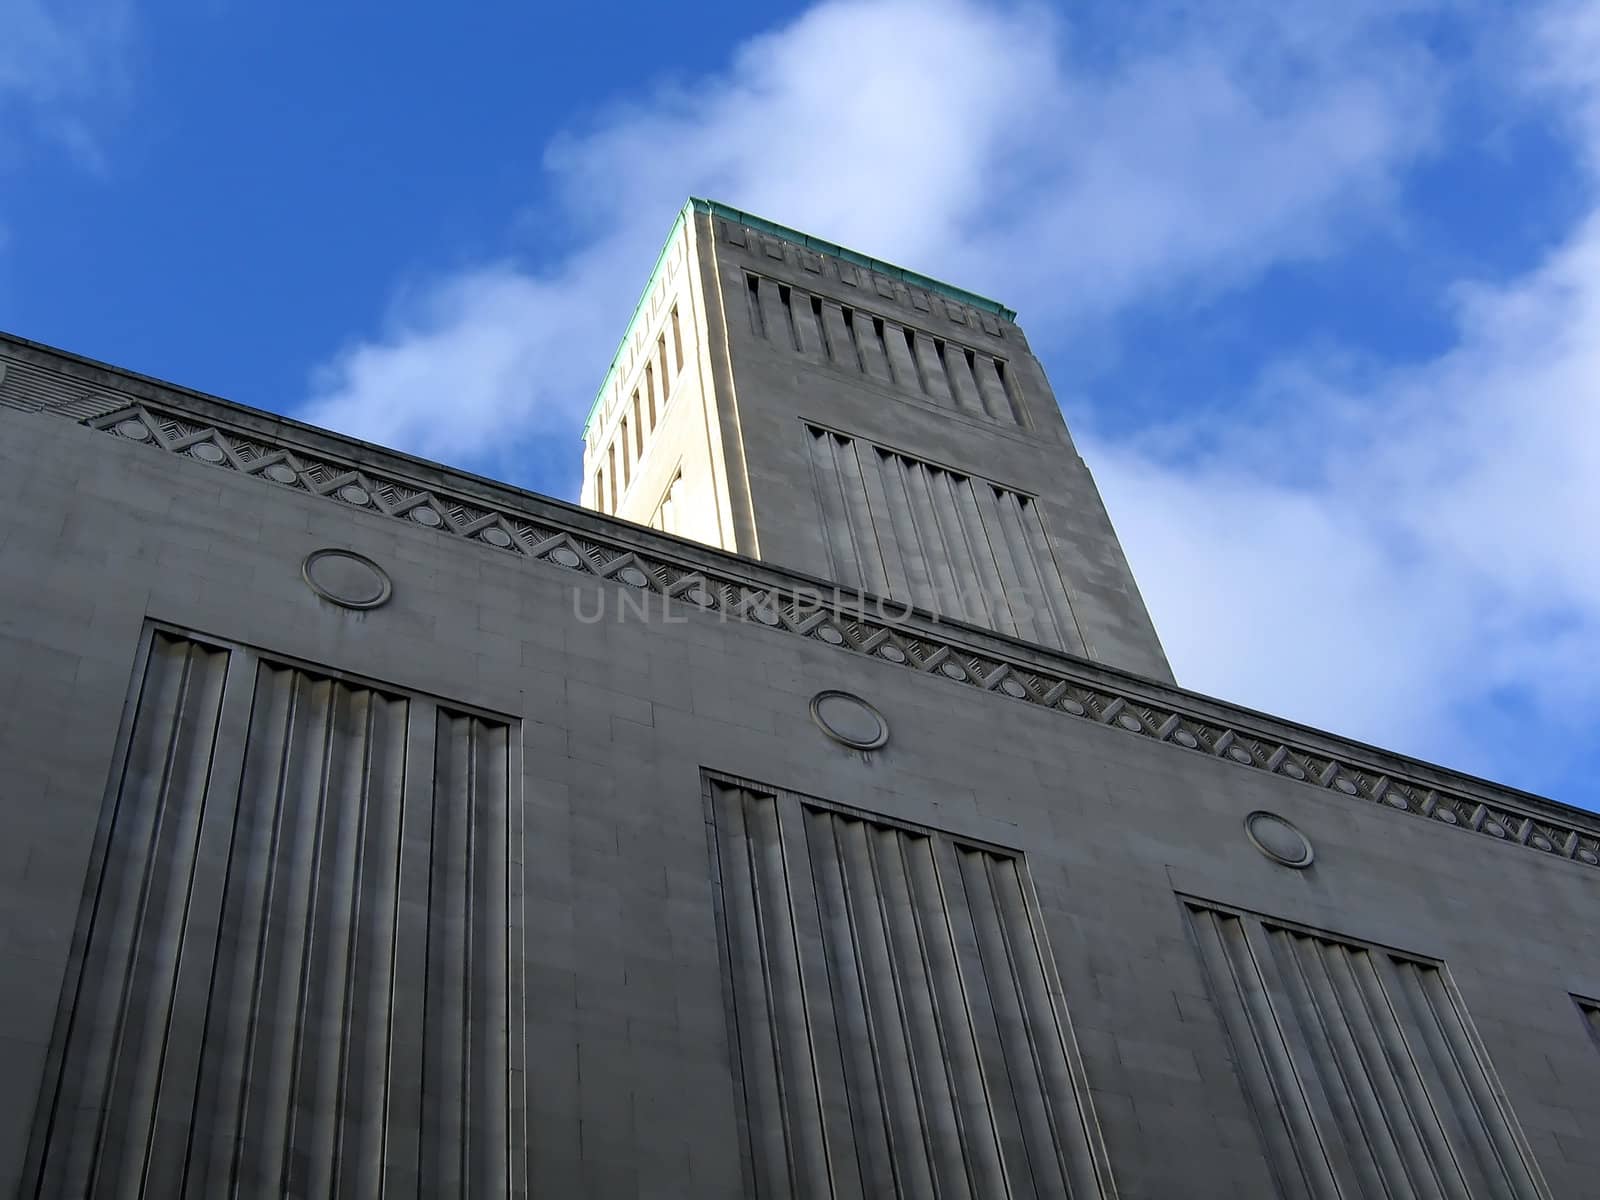 Historic Ventilation Building in Liverpool by green308